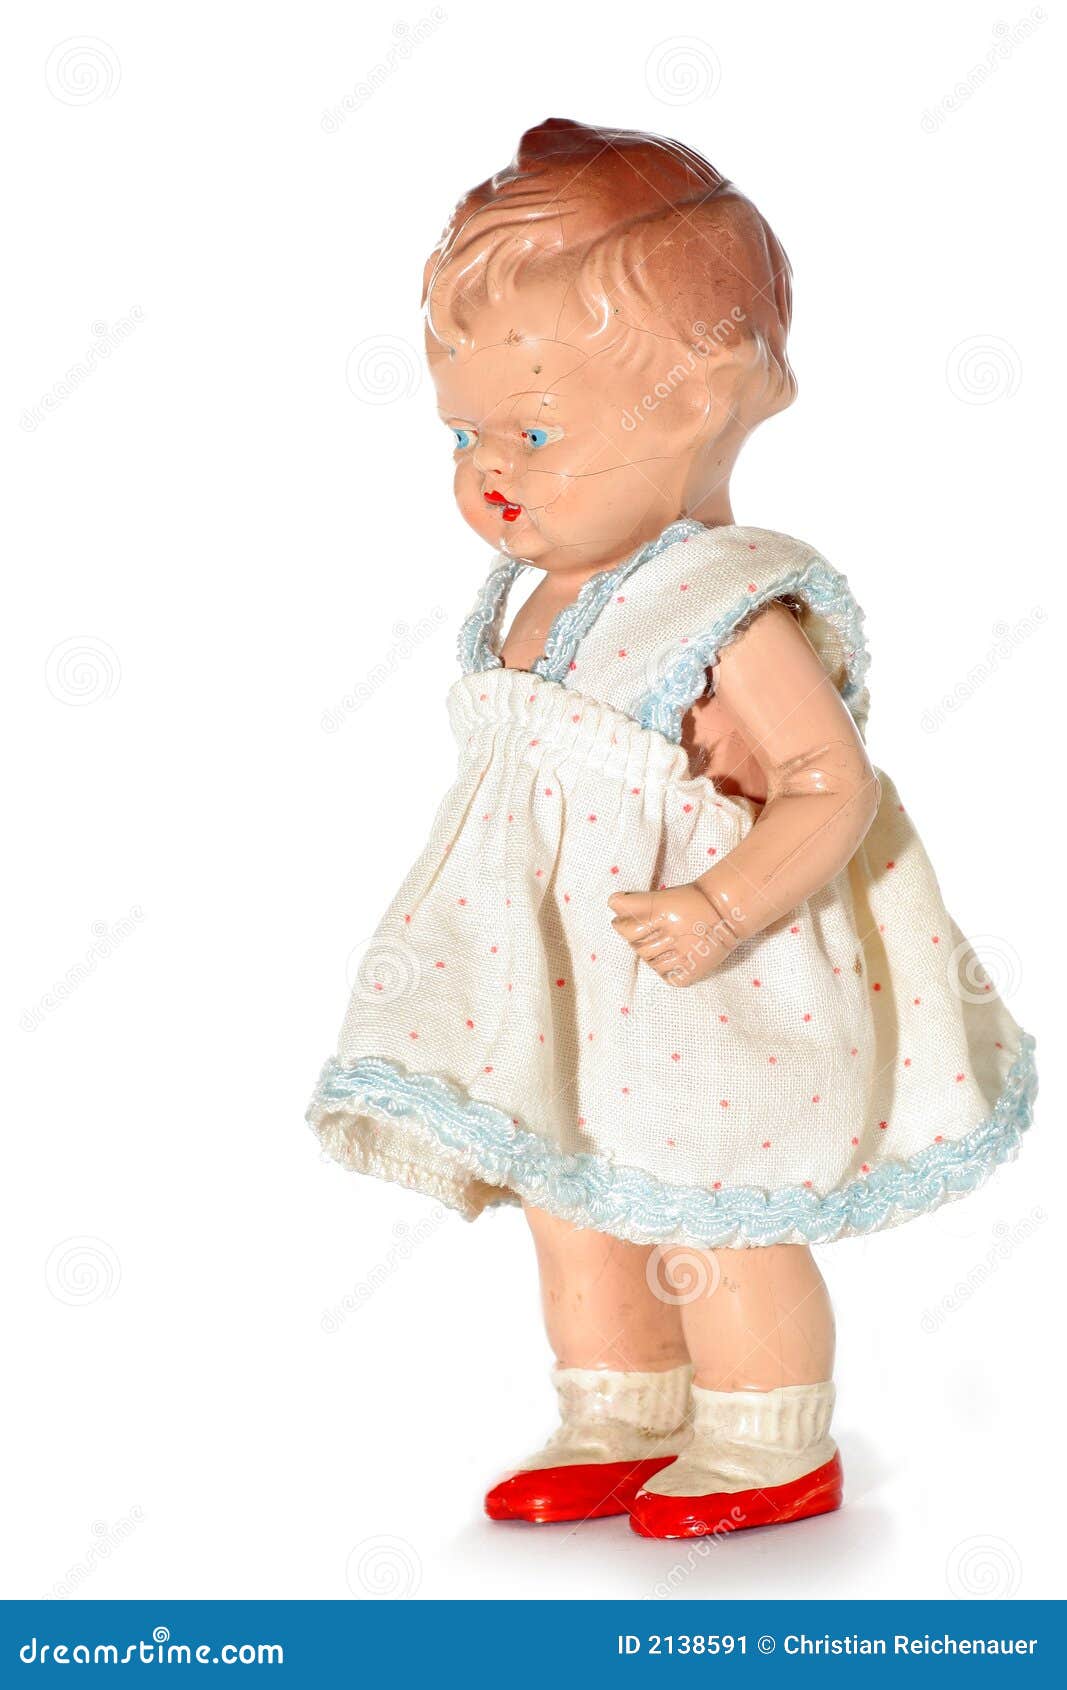 old abused child doll #4